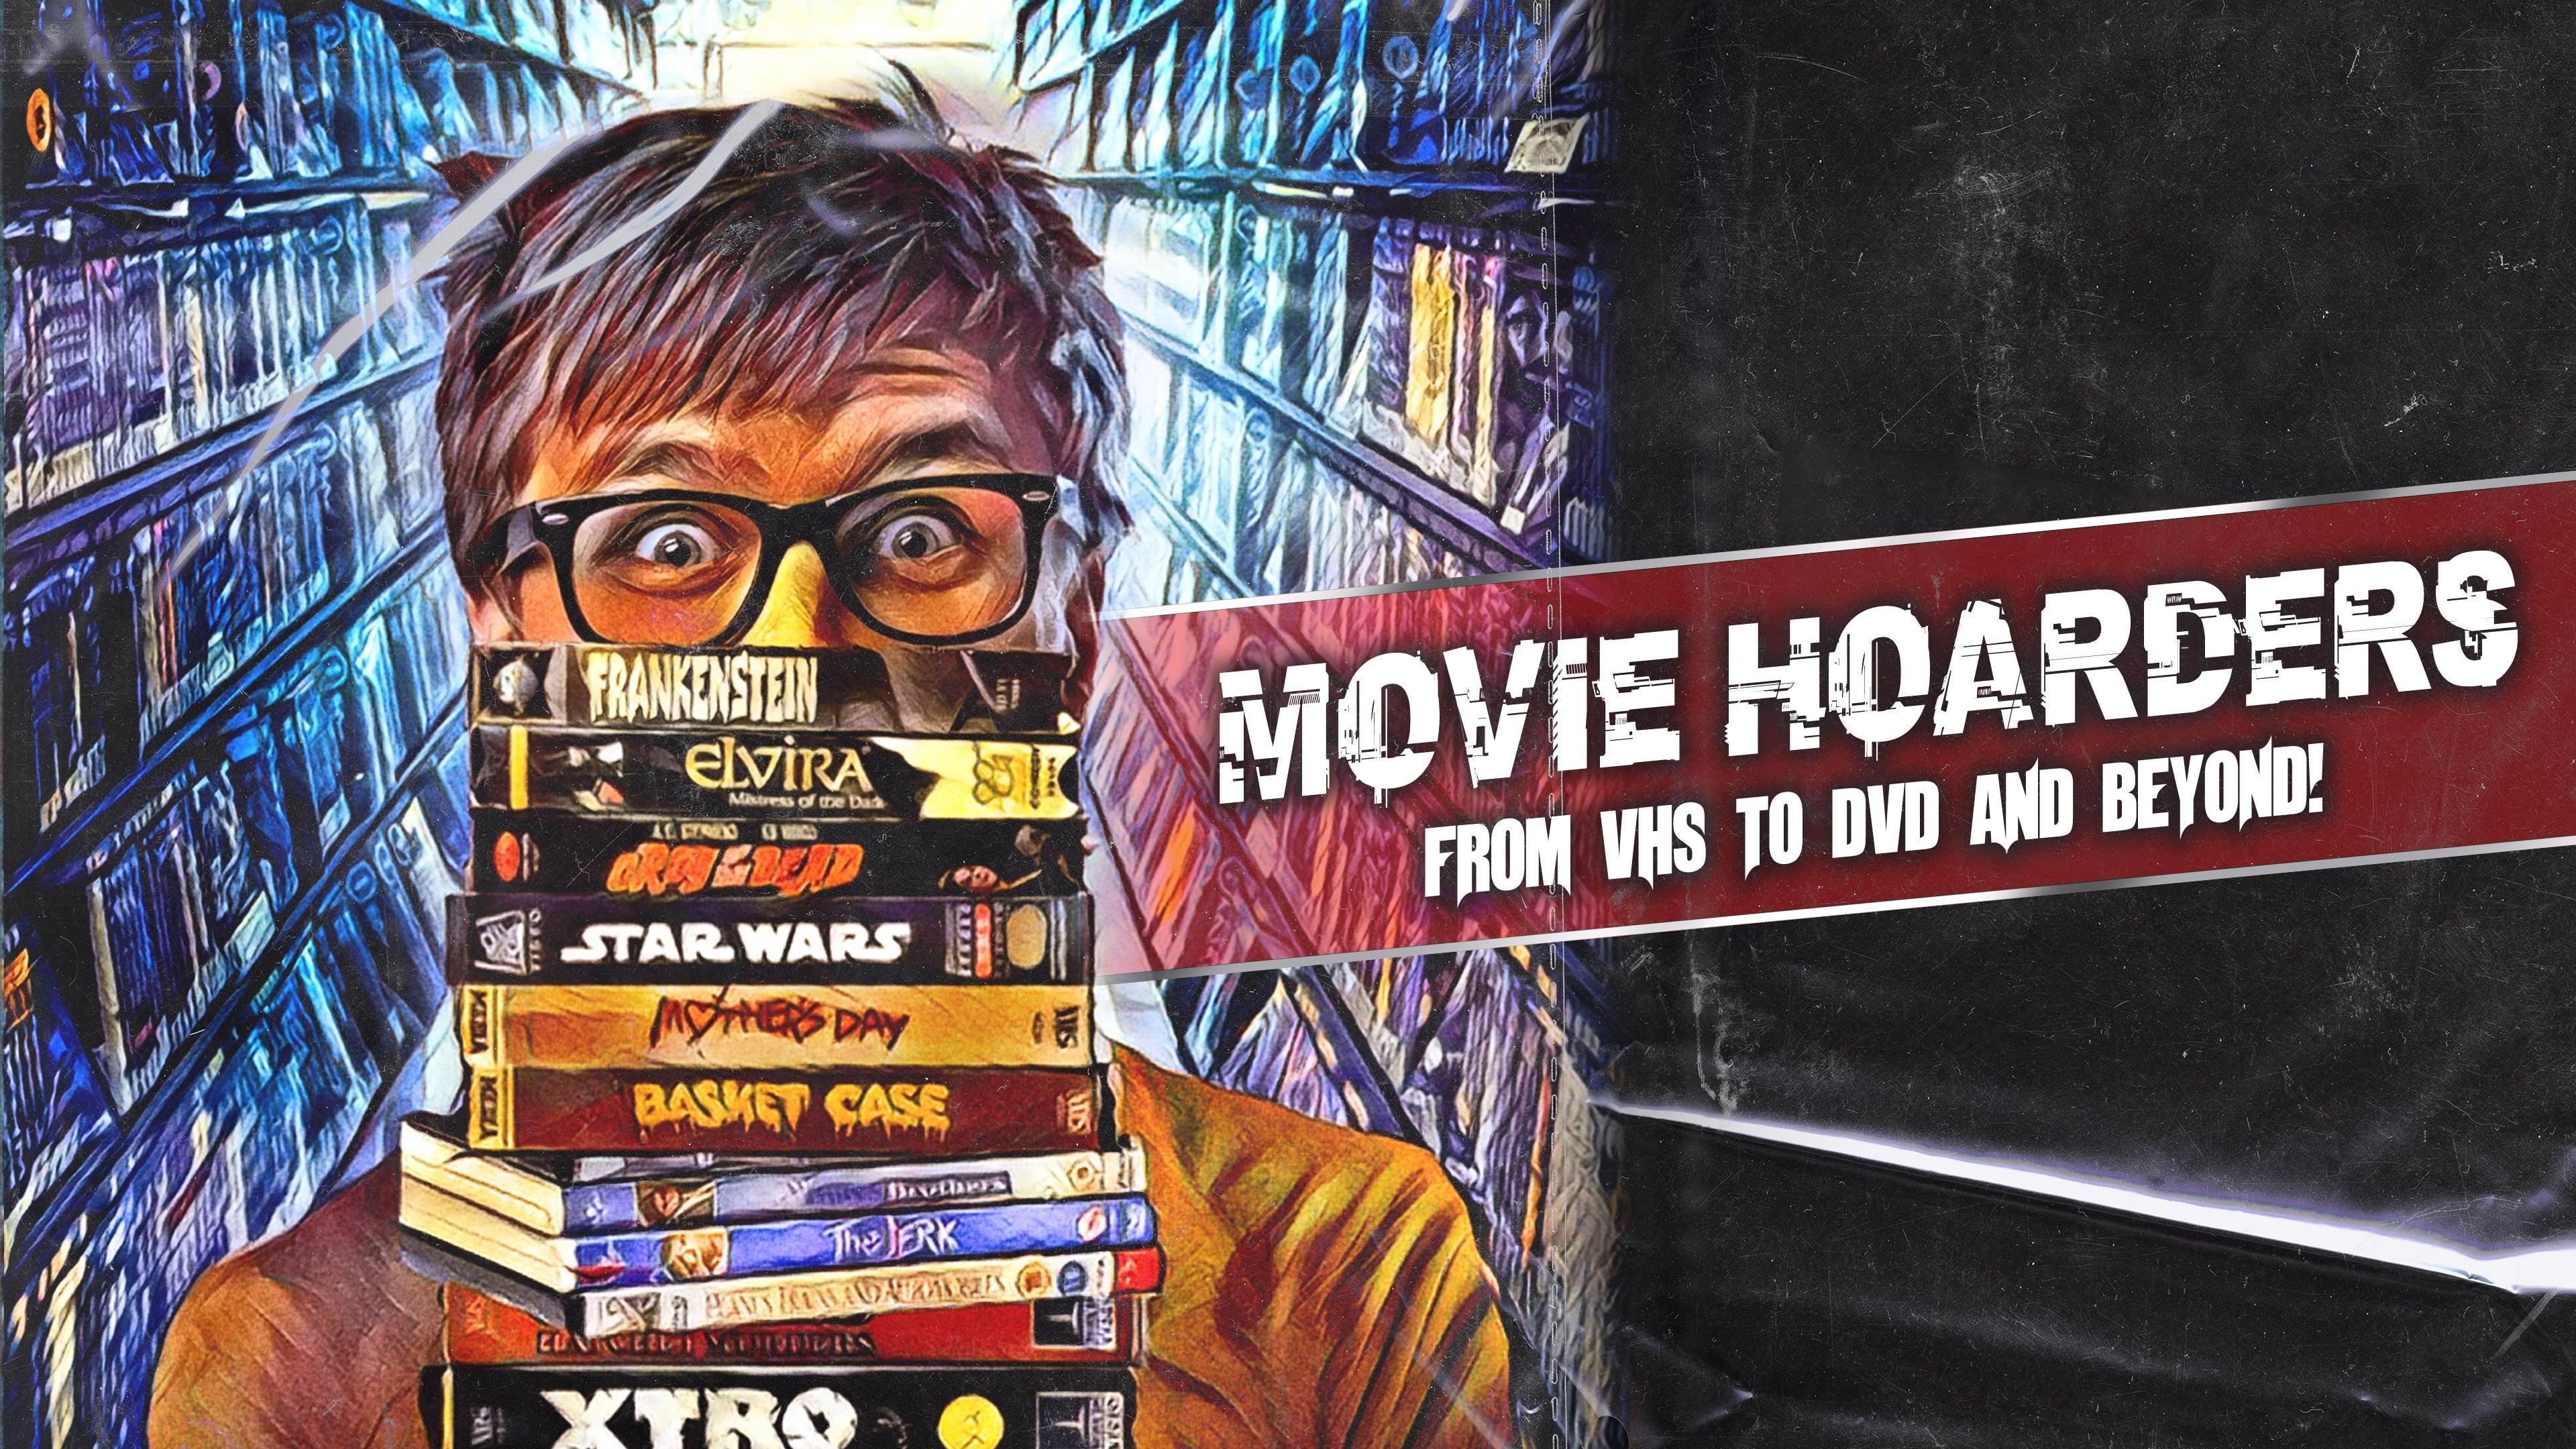 Movie Hoarders: From VHS to DVD and Beyond! backdrop